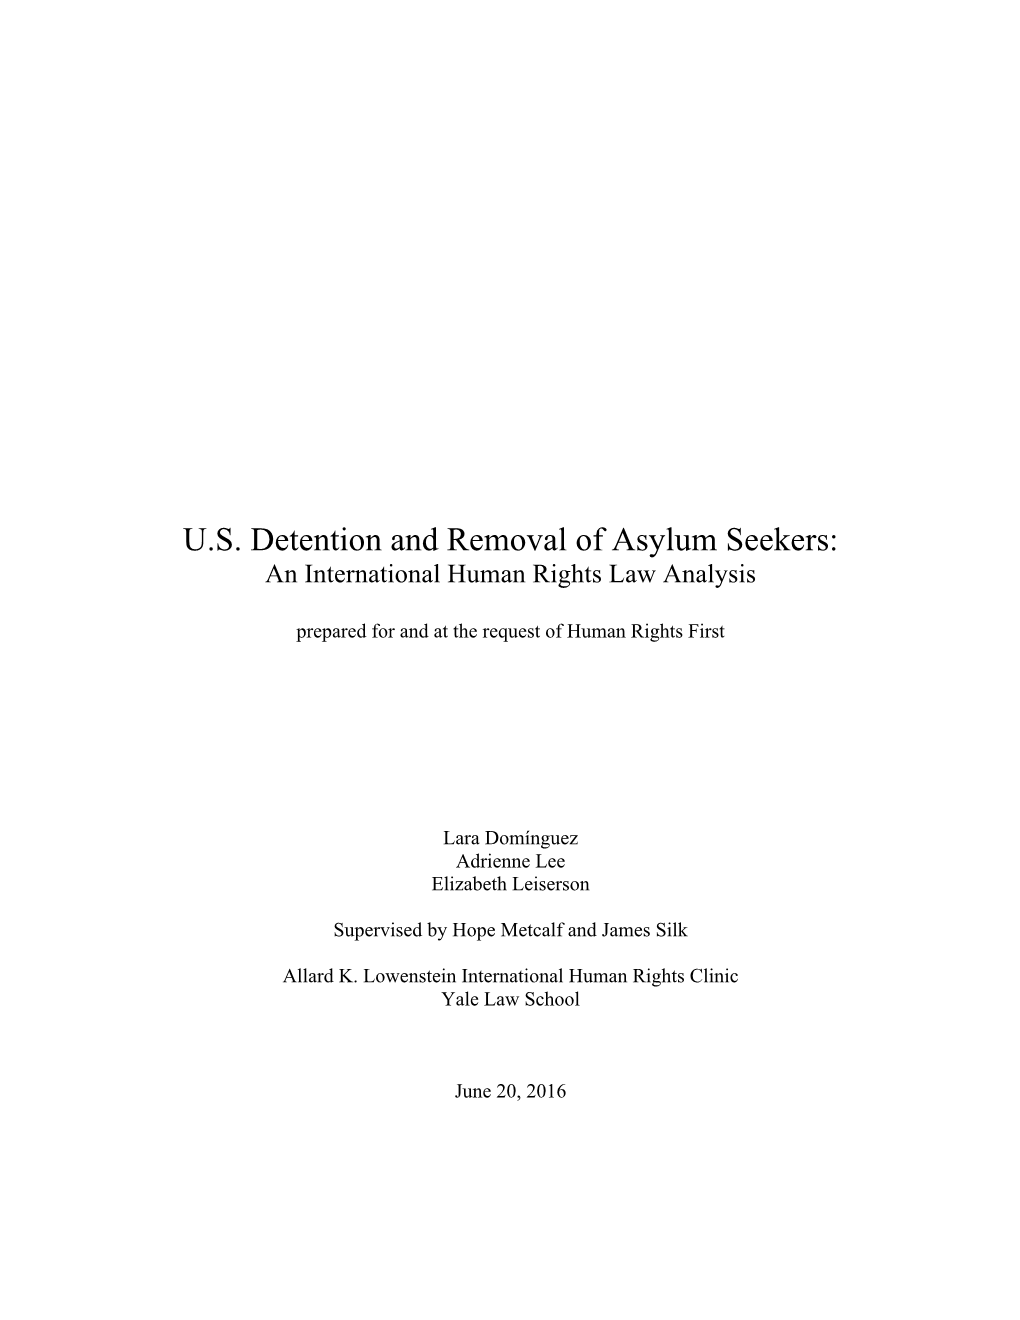 U.S. Detention and Removal of Asylum Seekers: an International Human Rights Law Analysis